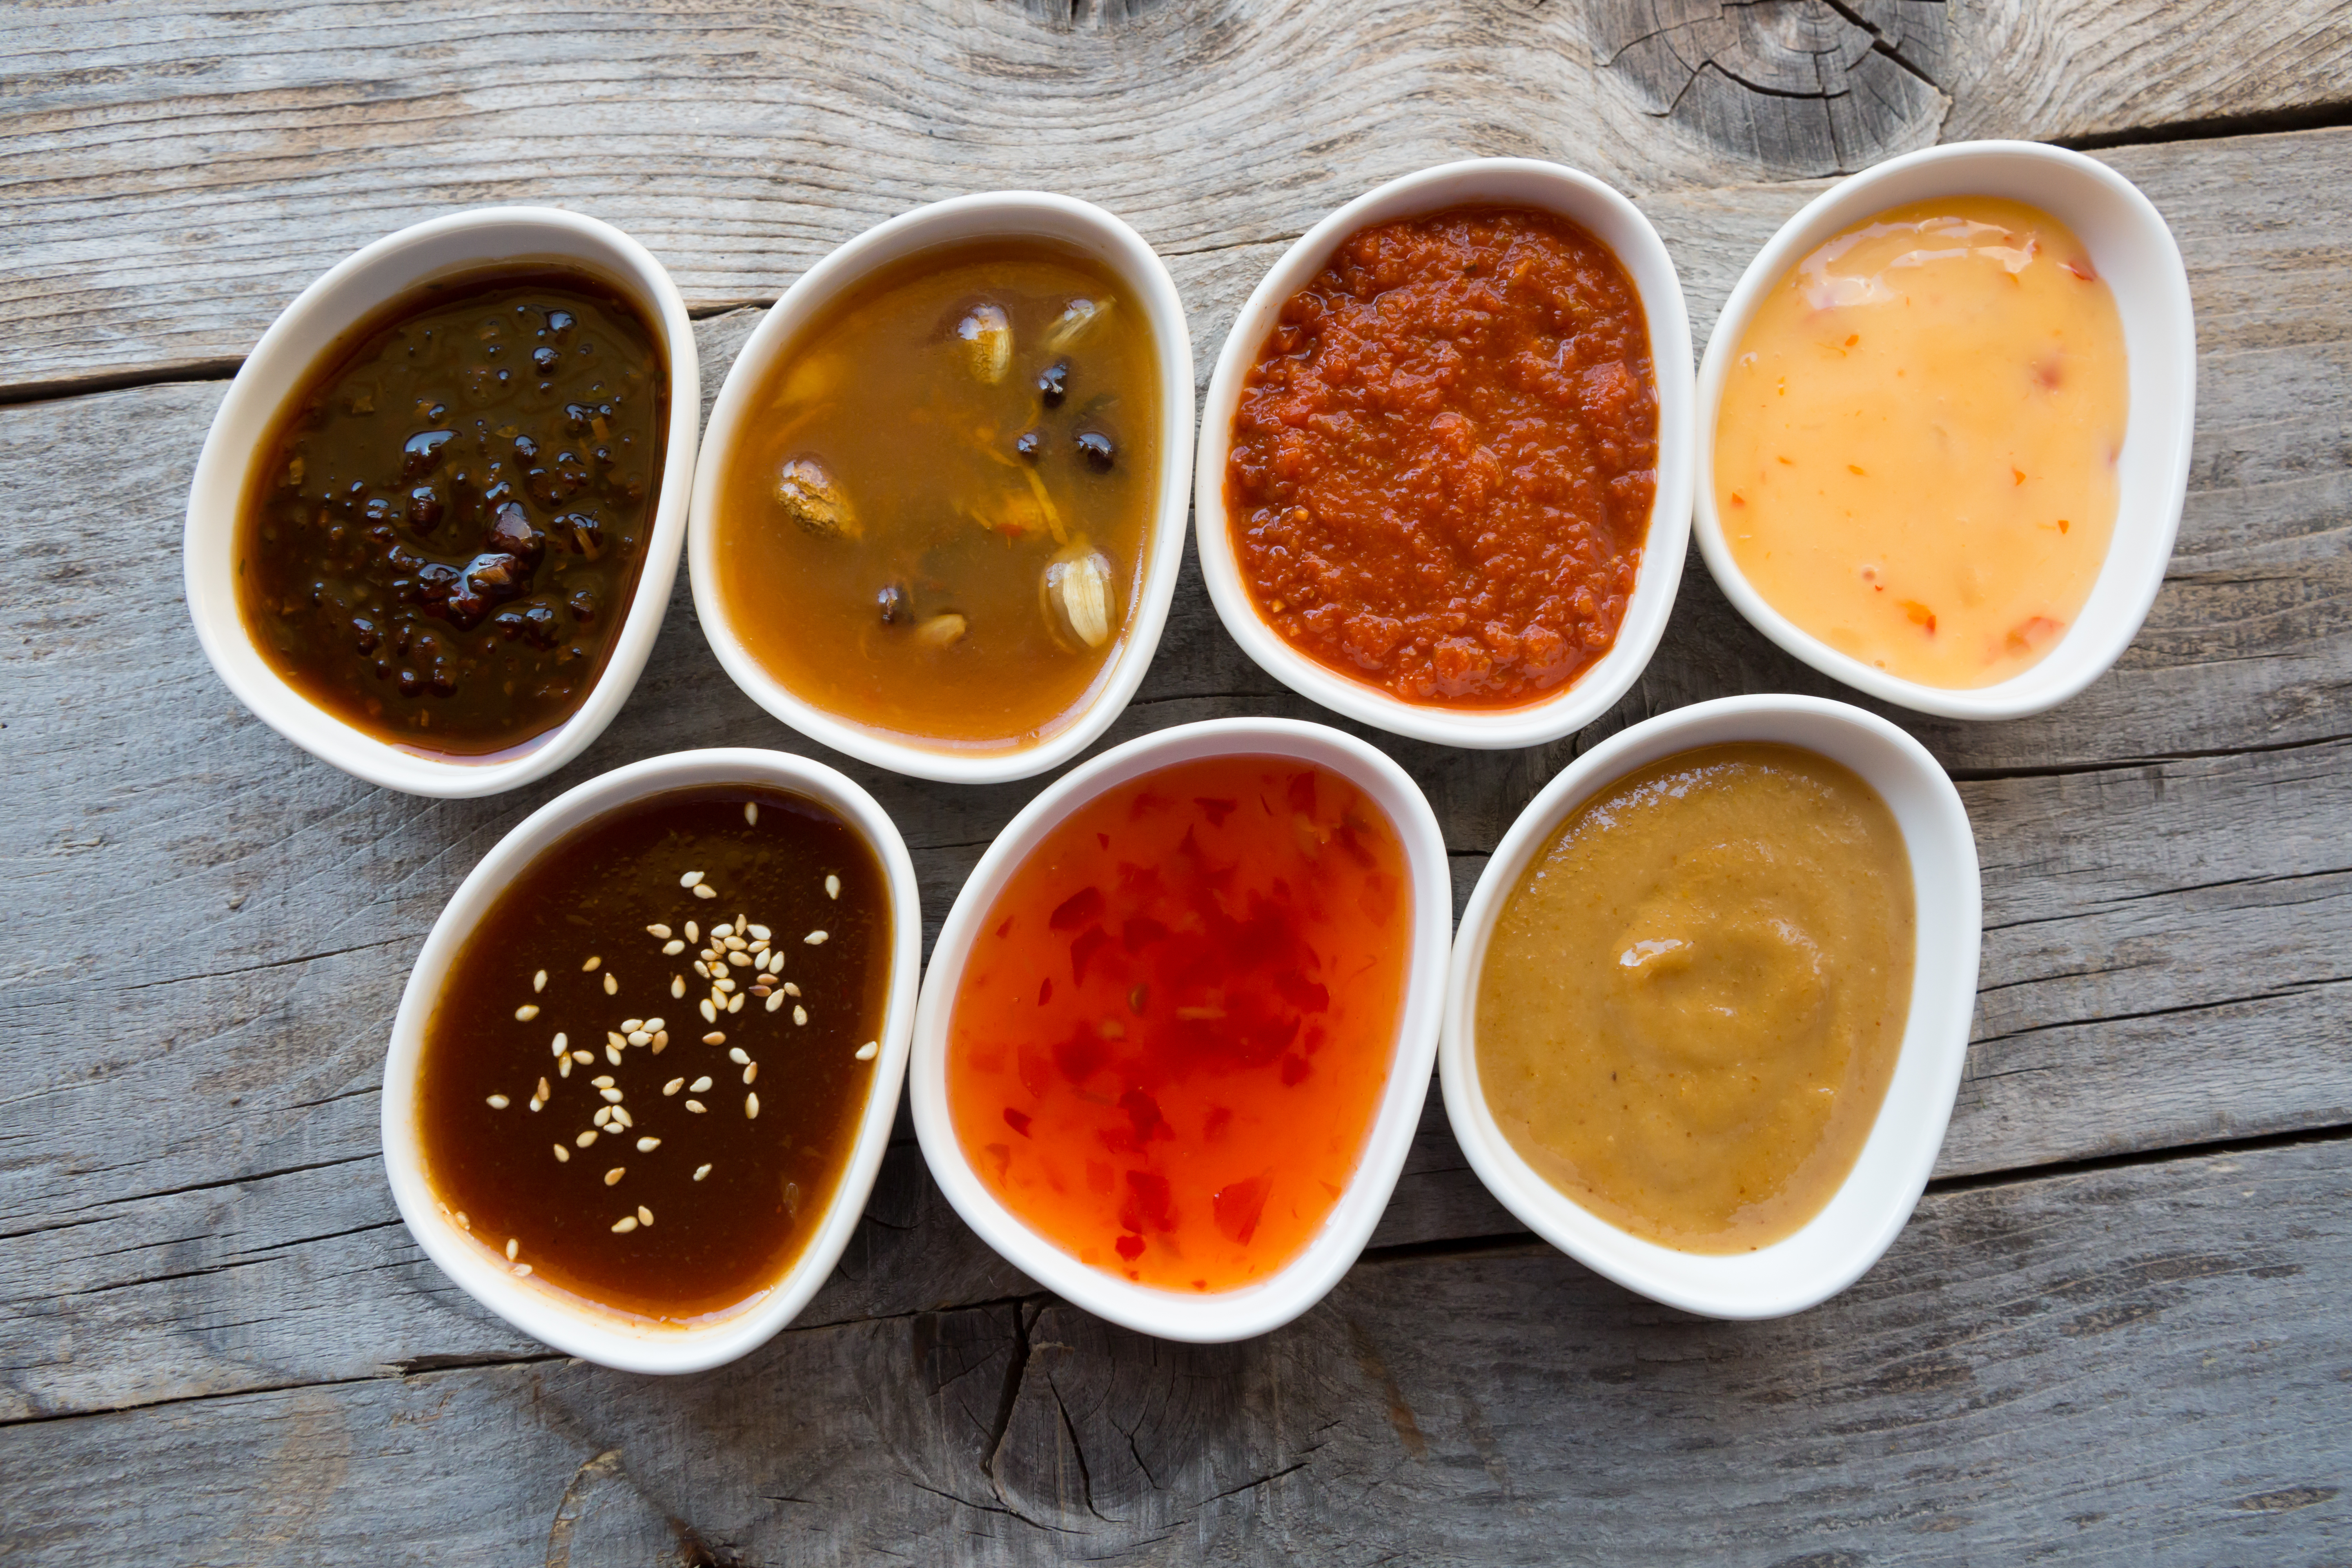 All sorts of sauces